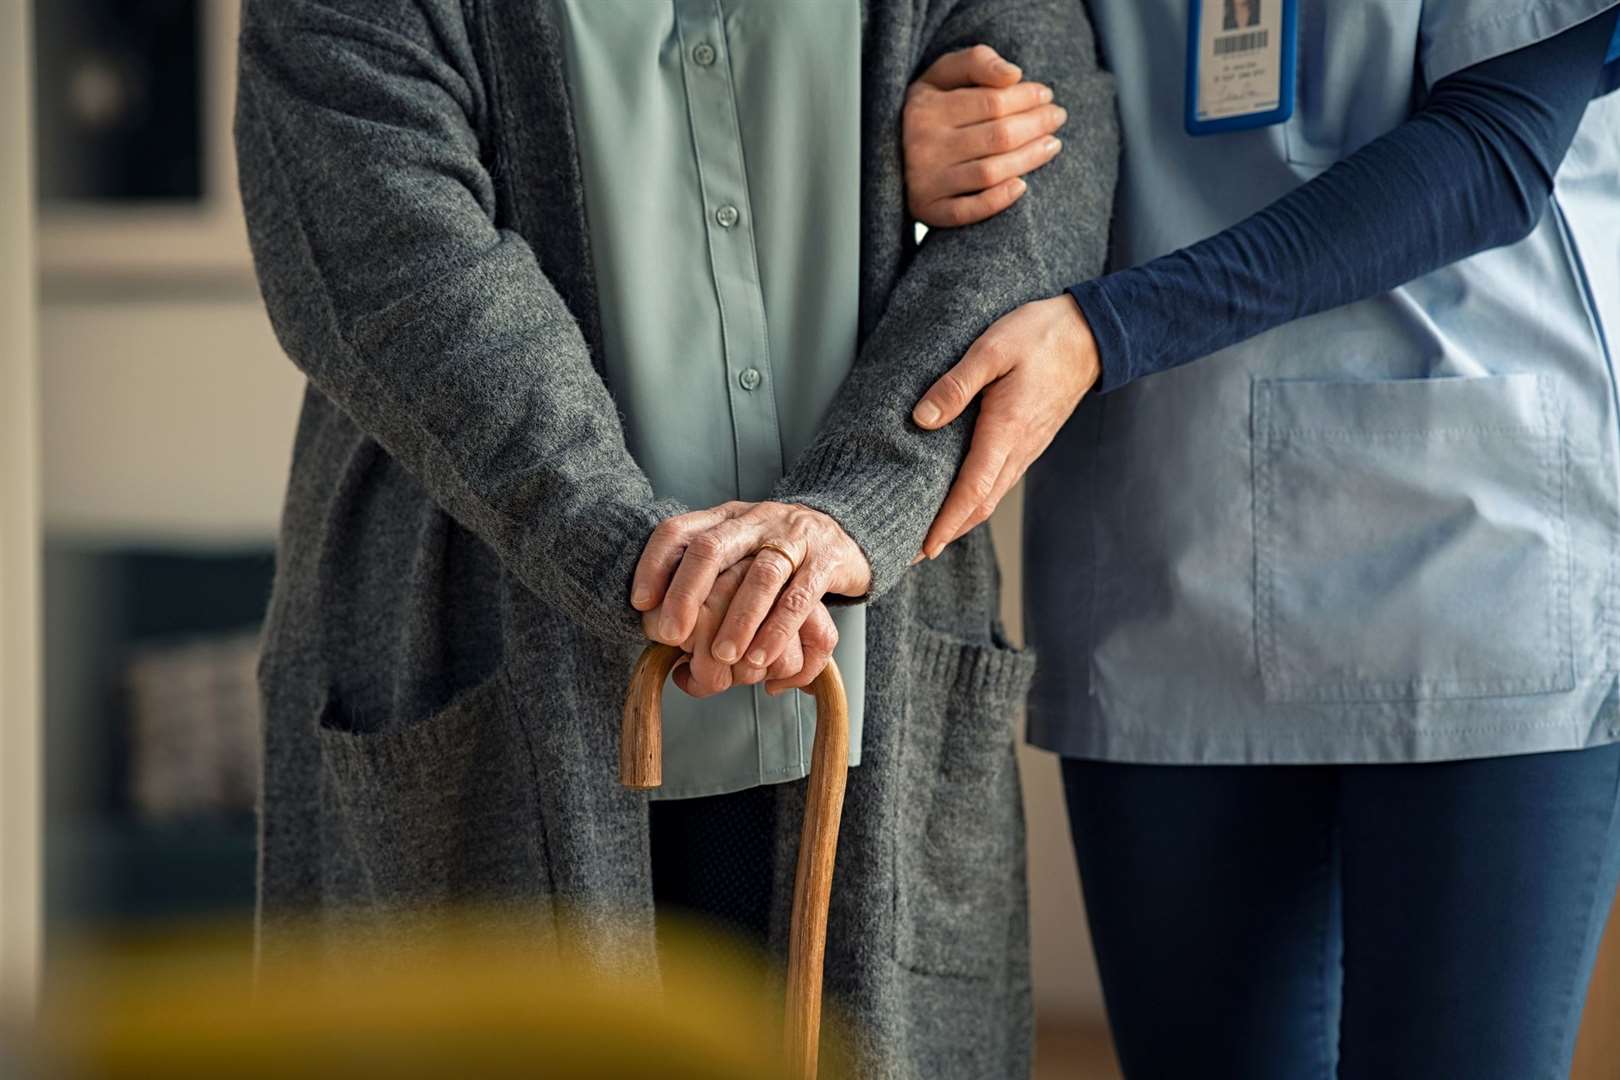 An ageing population means there is a growing inbalance between workers and retirees. Image: iStock.